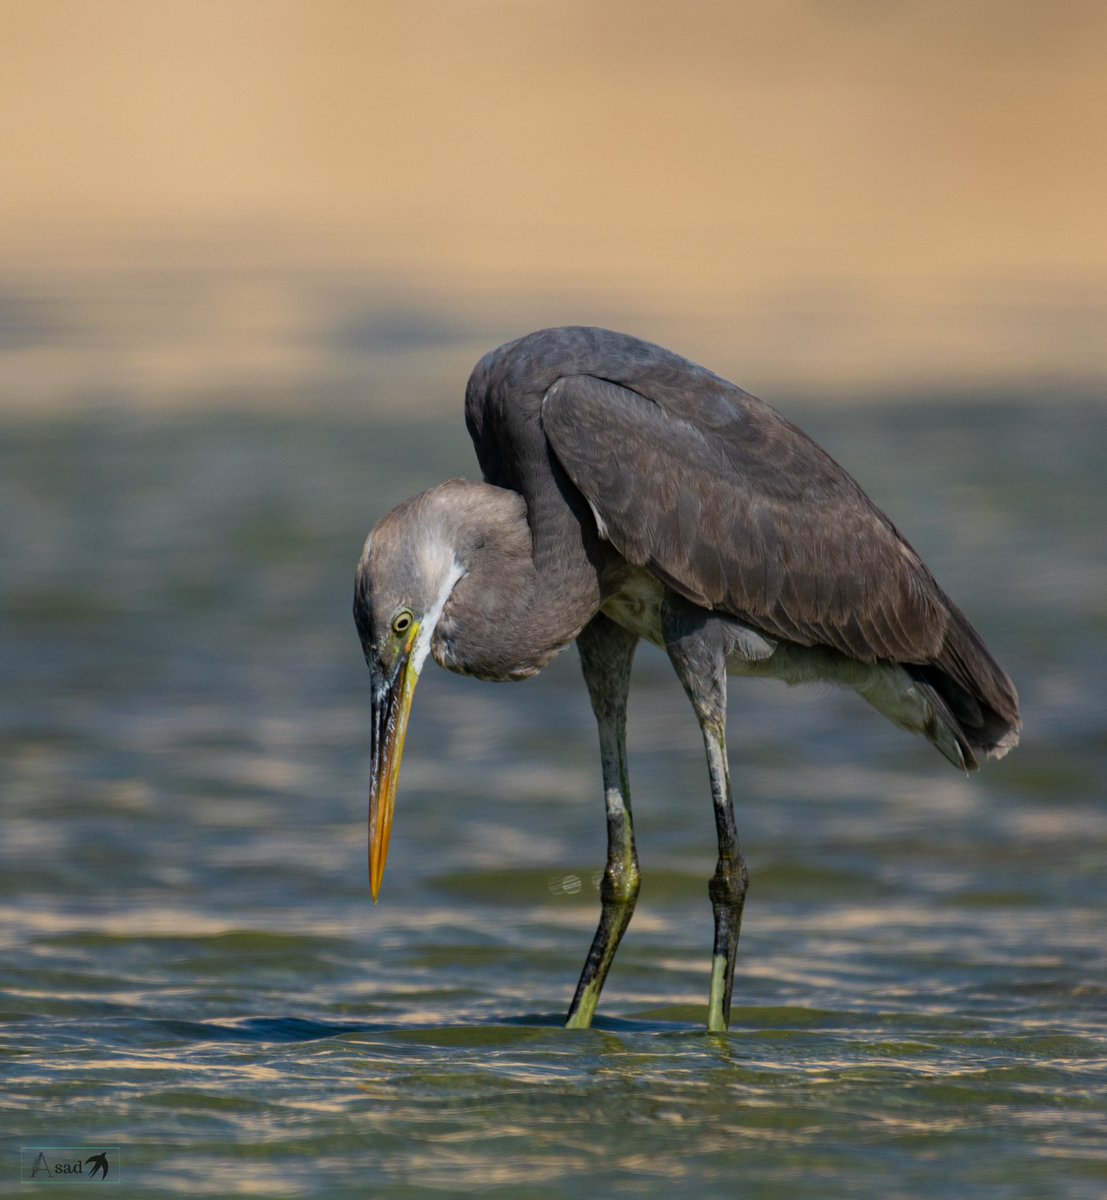 Where are all the fish!! Western reef heron with a perplexed look! #IndiAves #Birdphotography #birdwatching #birding #BBCWildlifePOTD @every_heron